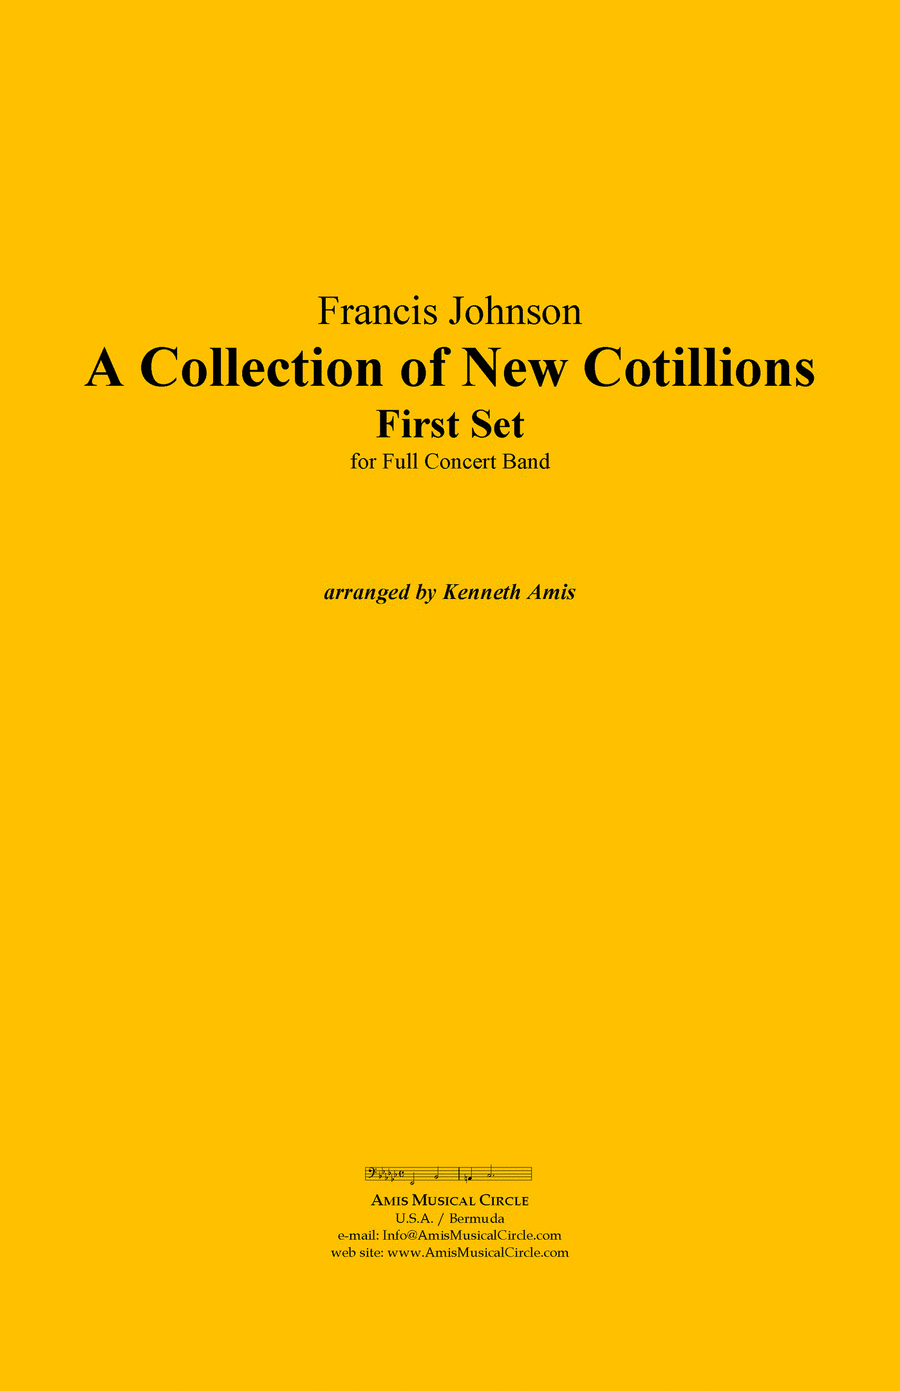 A Collection of New Cotillions First Set - CONDUCTOR